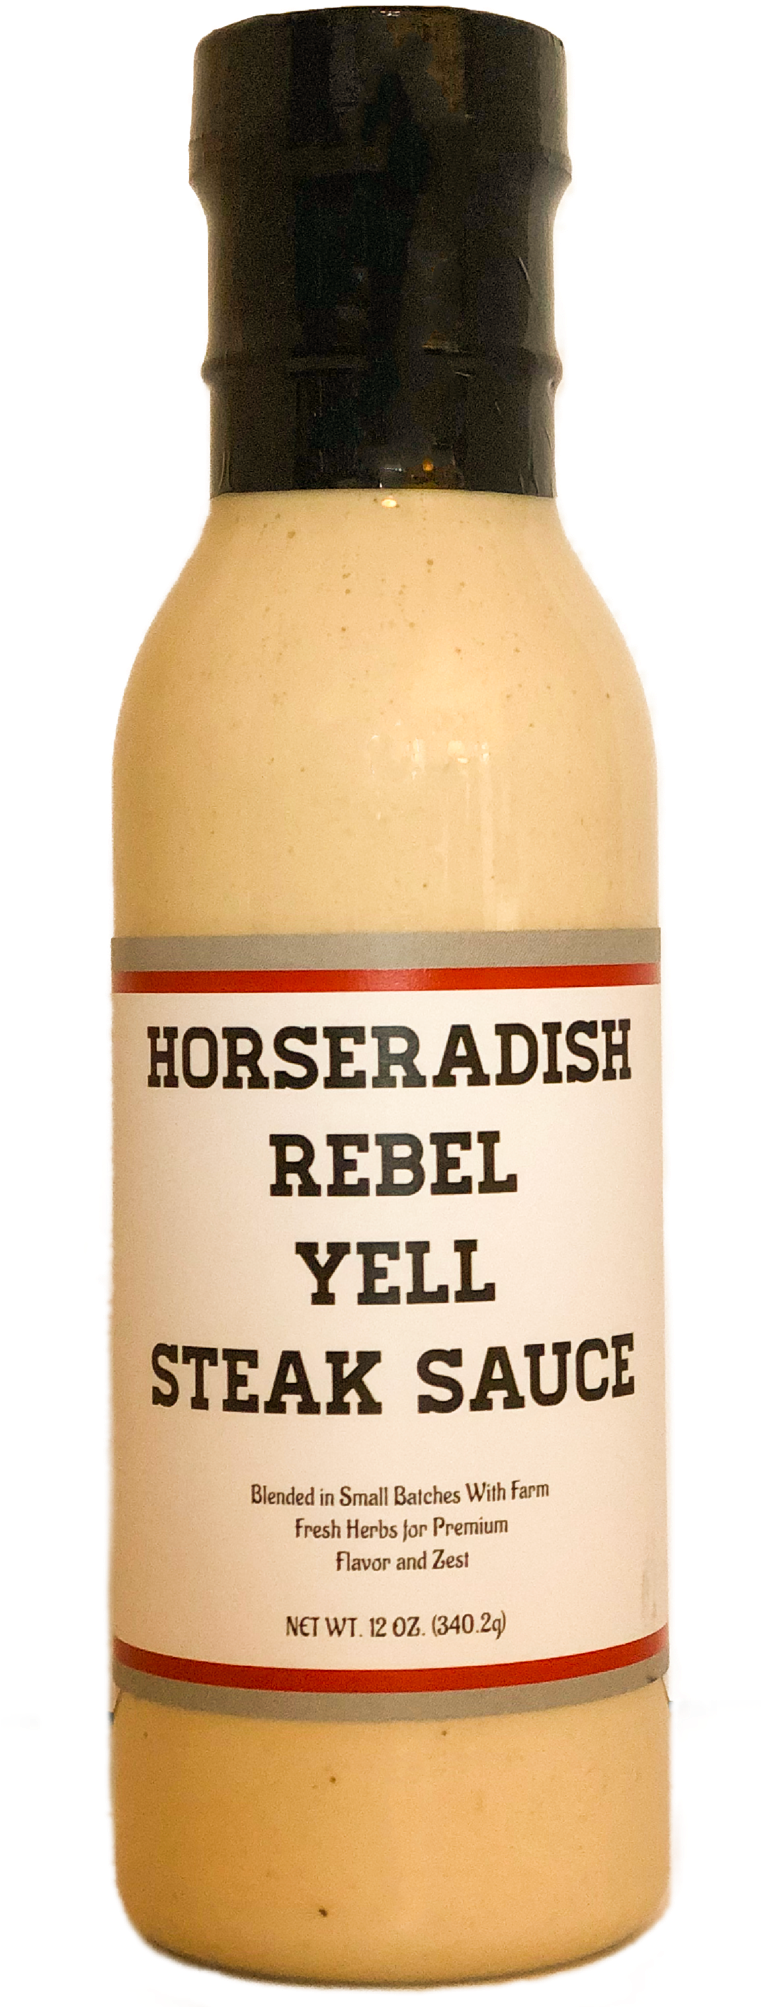 A Bottle Of Sauce With A Label